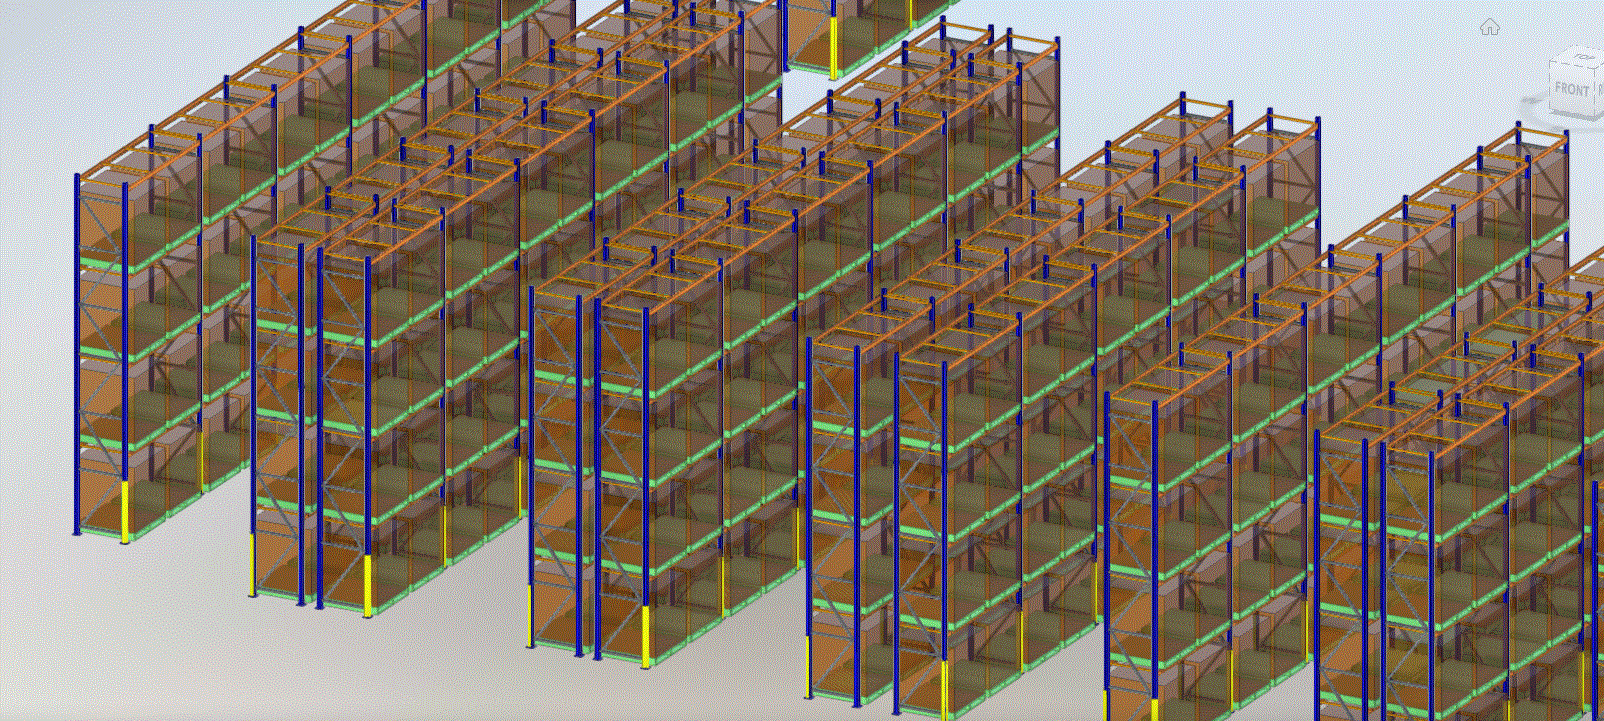 3D Model of Selective Pallet Racking. Designed for operations with FIFO inventory rotation.